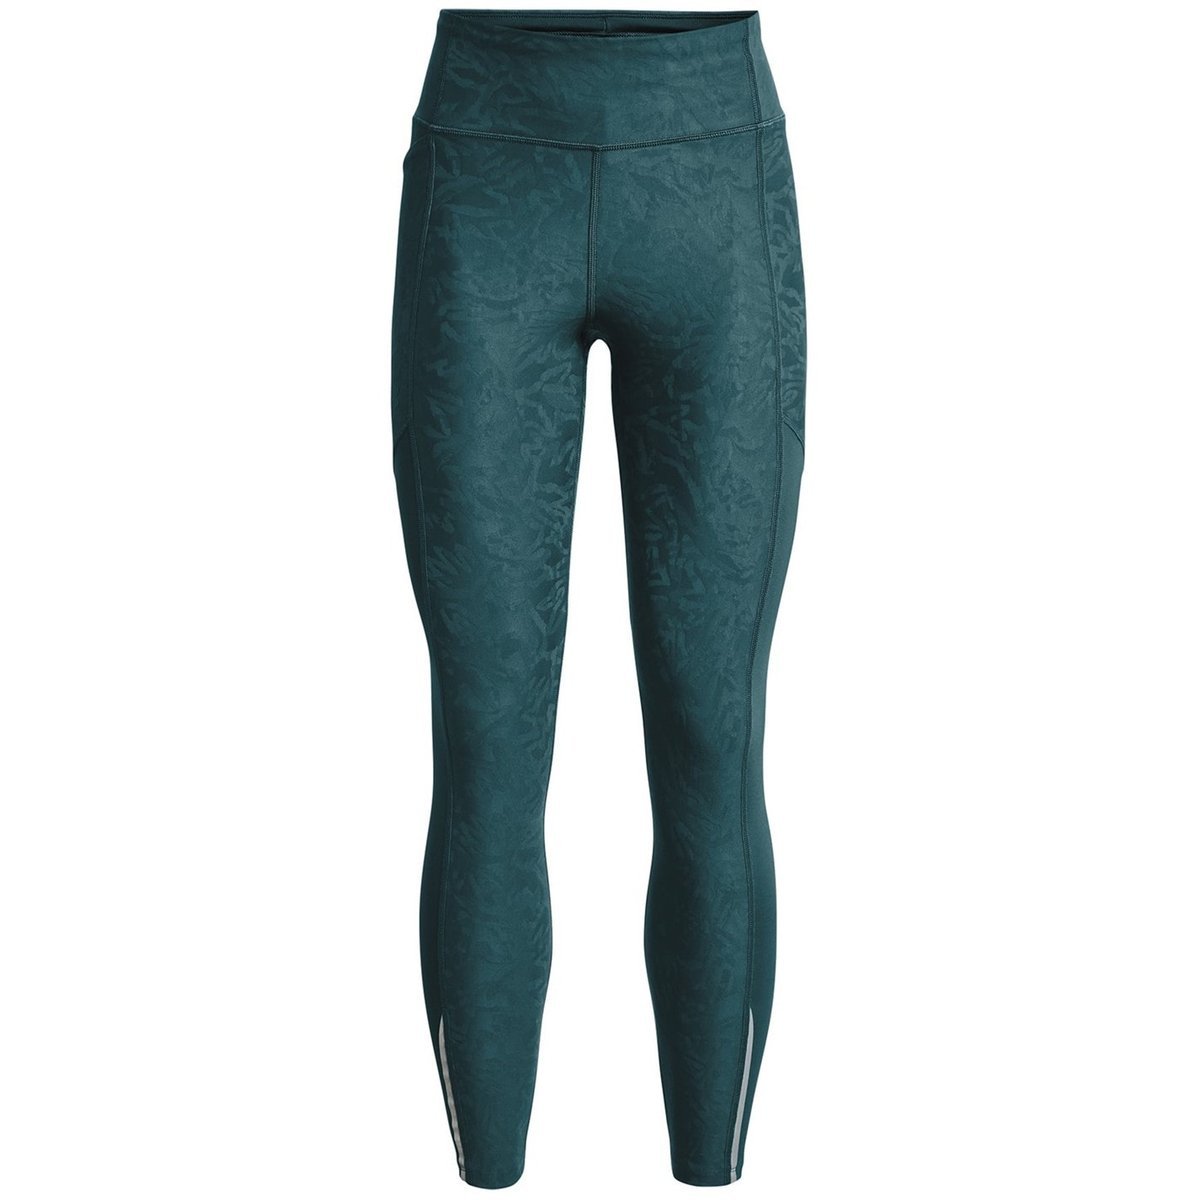 Under Armour Fly Fast 3.0 Women's Running Tights - Beta